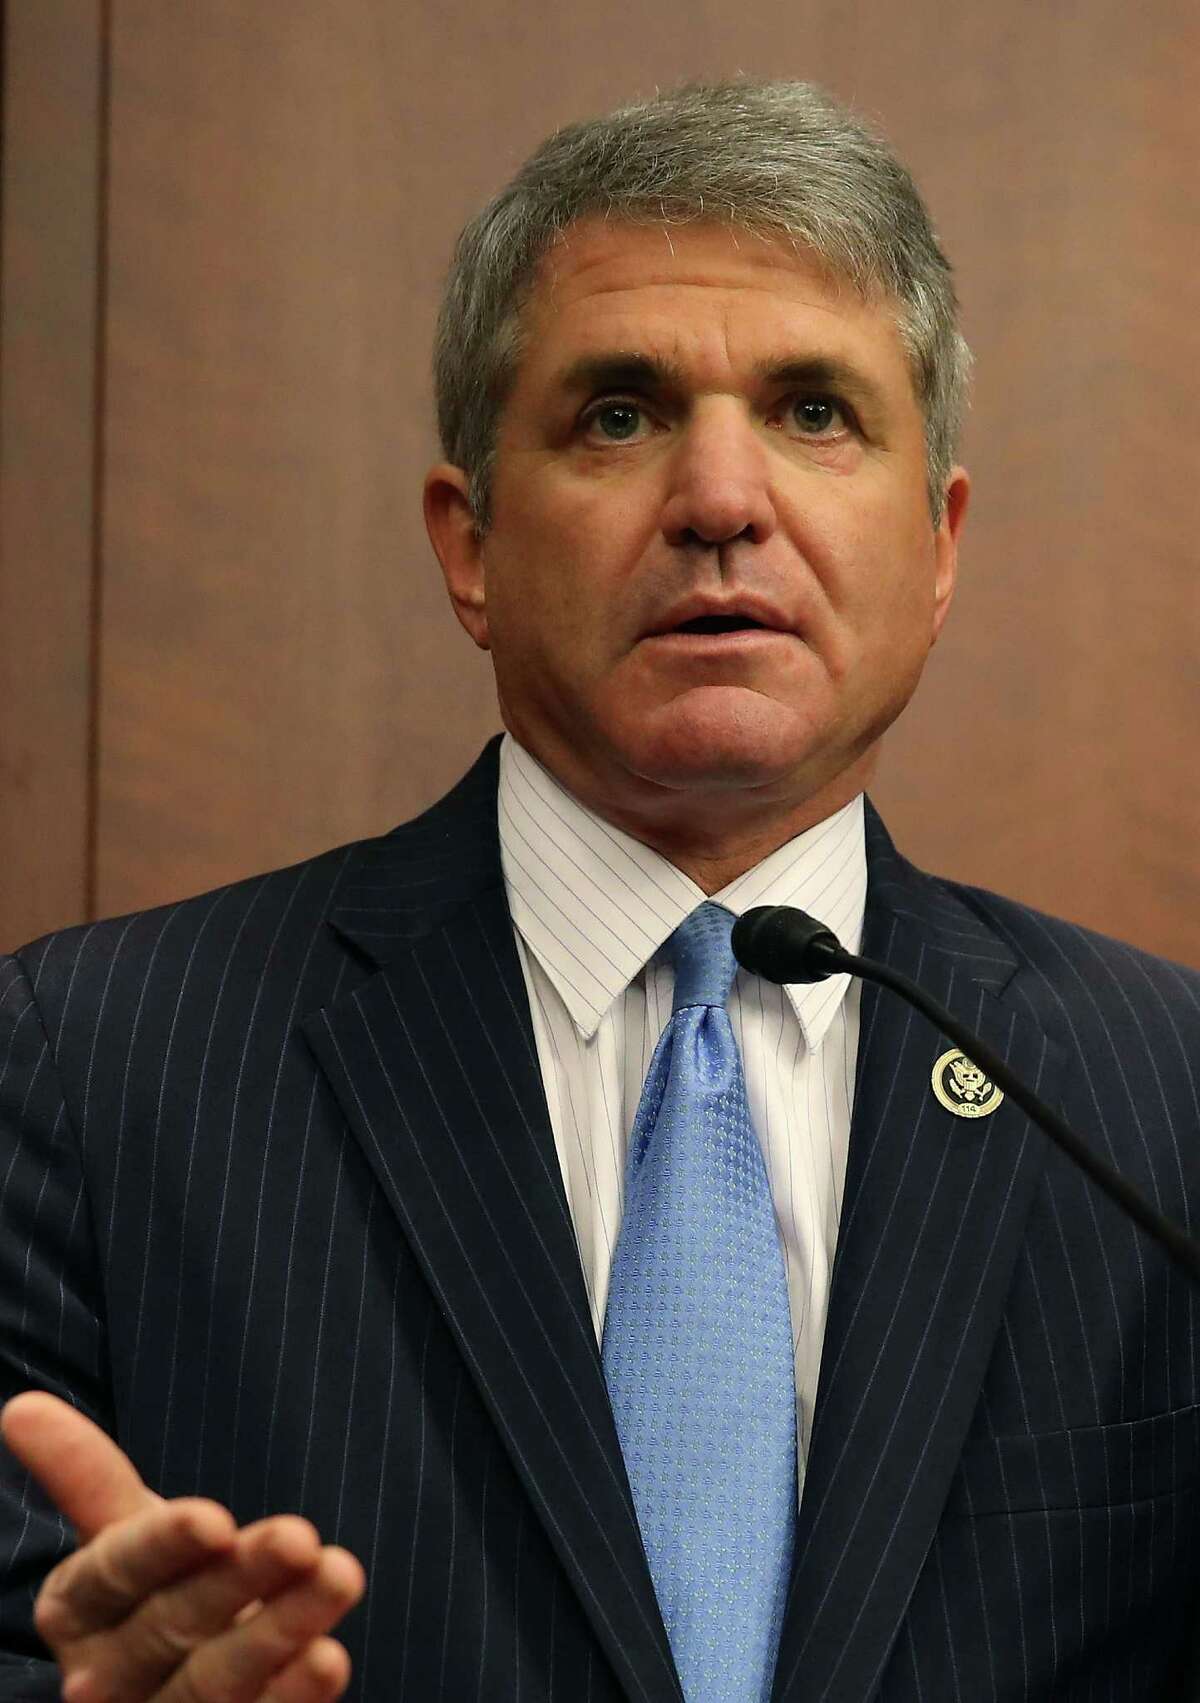 WASHINGTON, DC - JANUARY 05: House Homeland Security Chairman Michael McCaul, (R-TX), speaks about cybersecurity during news conference on Capitol Hill, January 5, 2017 in Washington, DC. Chairman McCaul discussed recommendations for President-elect Donald Trump for strengthening the nation's cybersecurity efforts. (Photo by Mark Wilson/Getty Images)